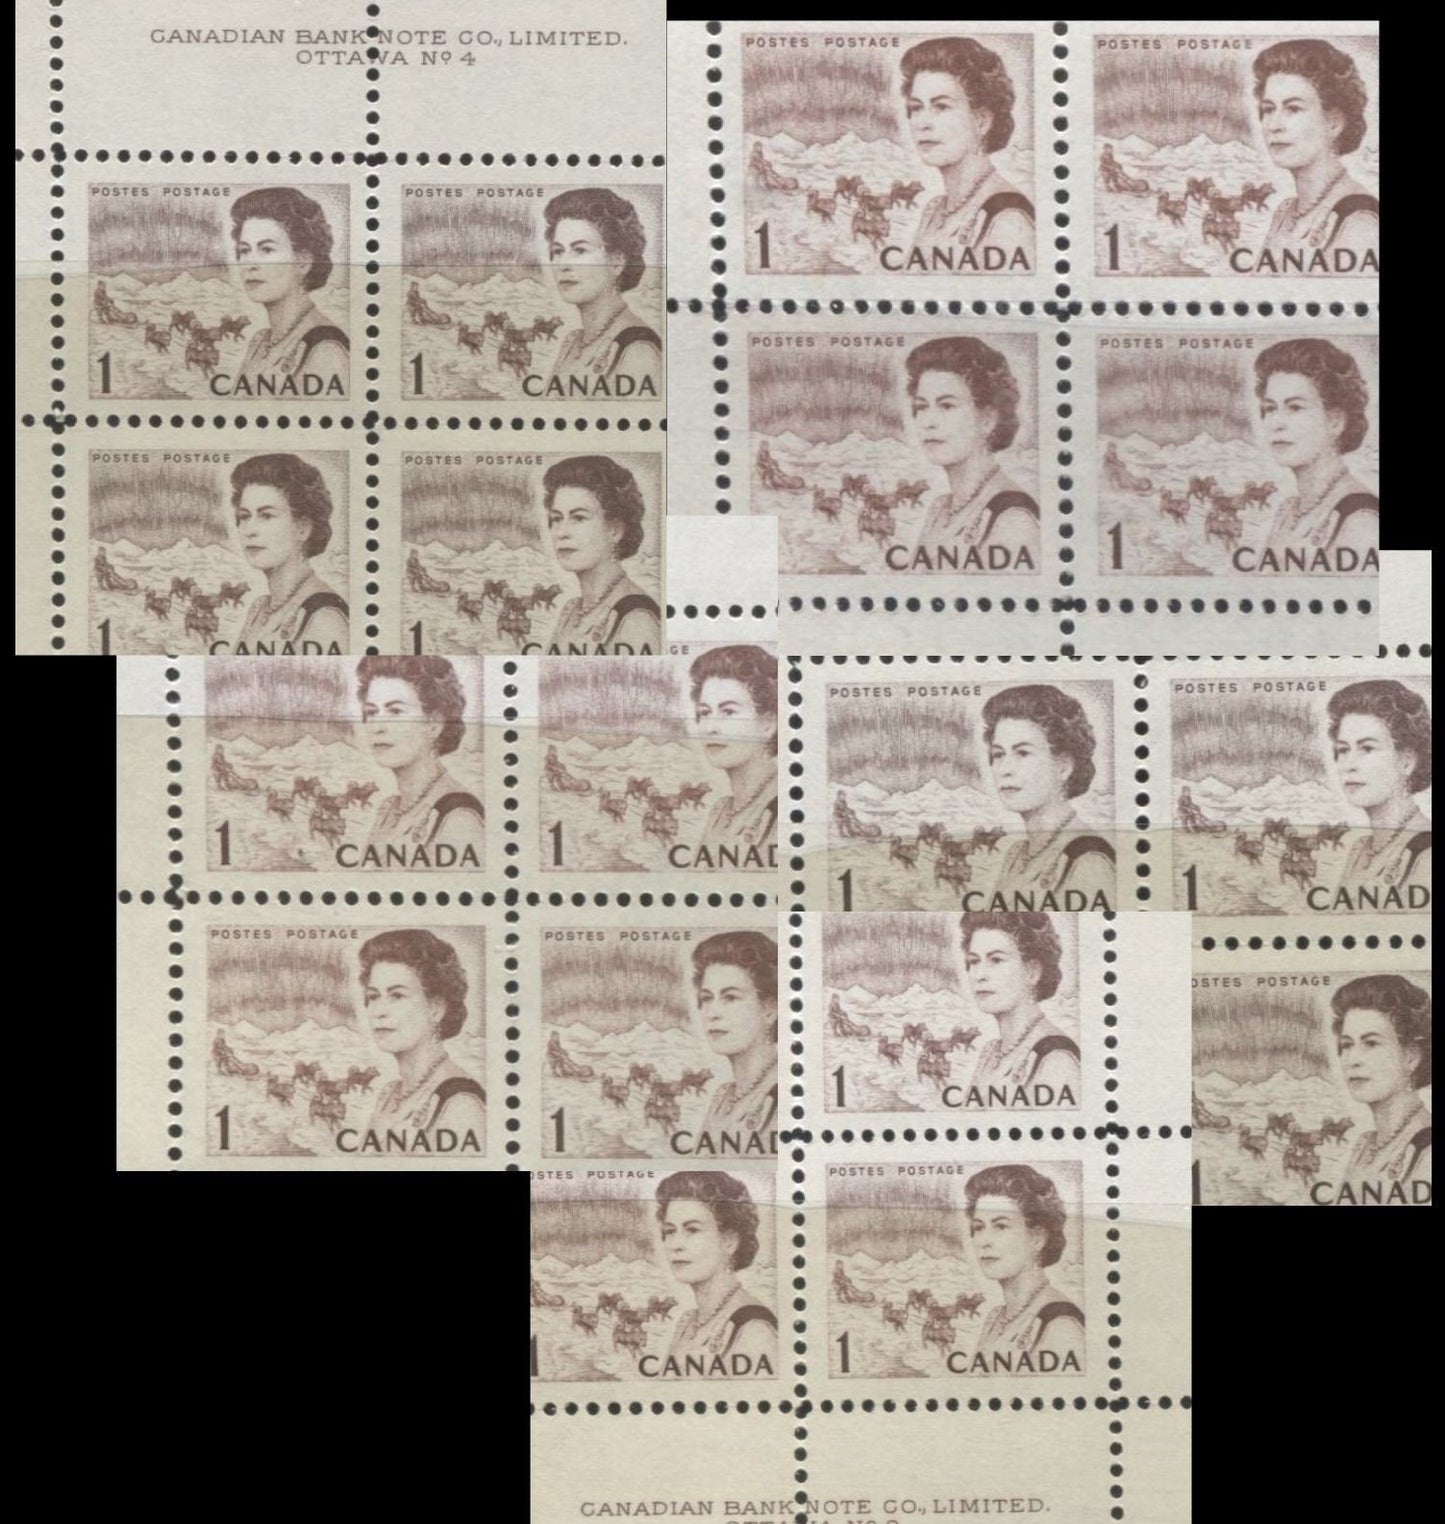 Lot #148 Canada #454piii 1c Reddish Brown, Reddish Chocolate & Chocolate, Northern Lights and Dogsled Team, 1967-1973 Centennial Issue, A Specialized Lot of 4 General Tagged Upper Left Corner Blocks on  LF-fl Bluish Violet Paper, PVA Gum